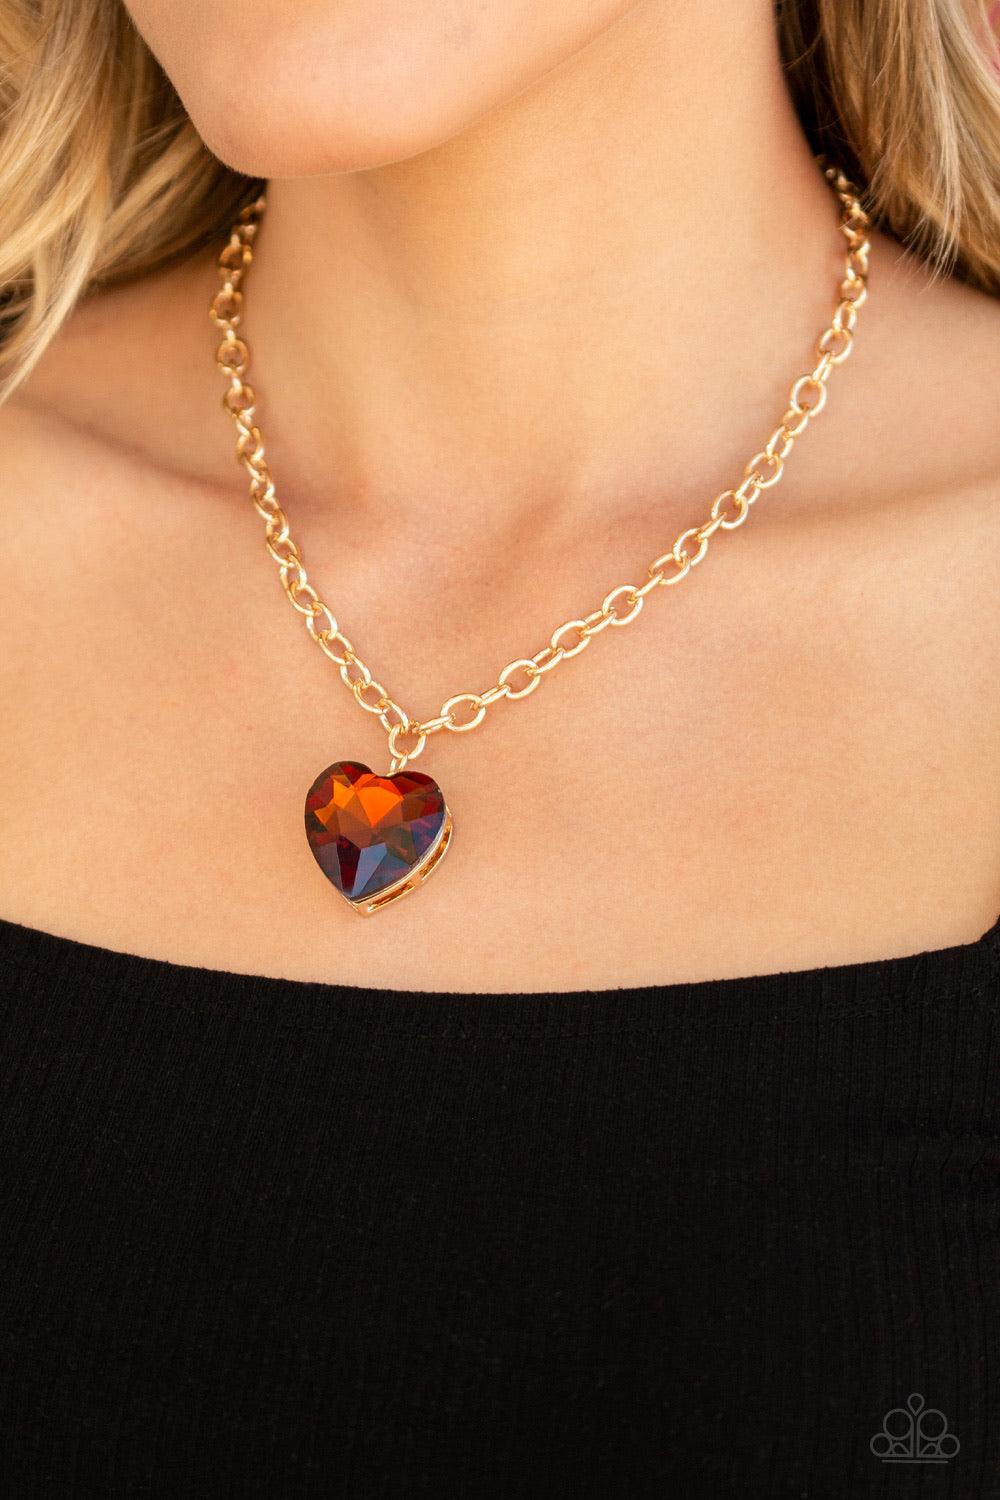 Paparazzi Accessories Flirtatiously Flashy - Brown Set atop a sleek gold fitting, a topaz heart-shaped gem swings from the bottom of a classic gold chain below the collar for a whimsical look. Features an adjustable clasp closure. Jewelry